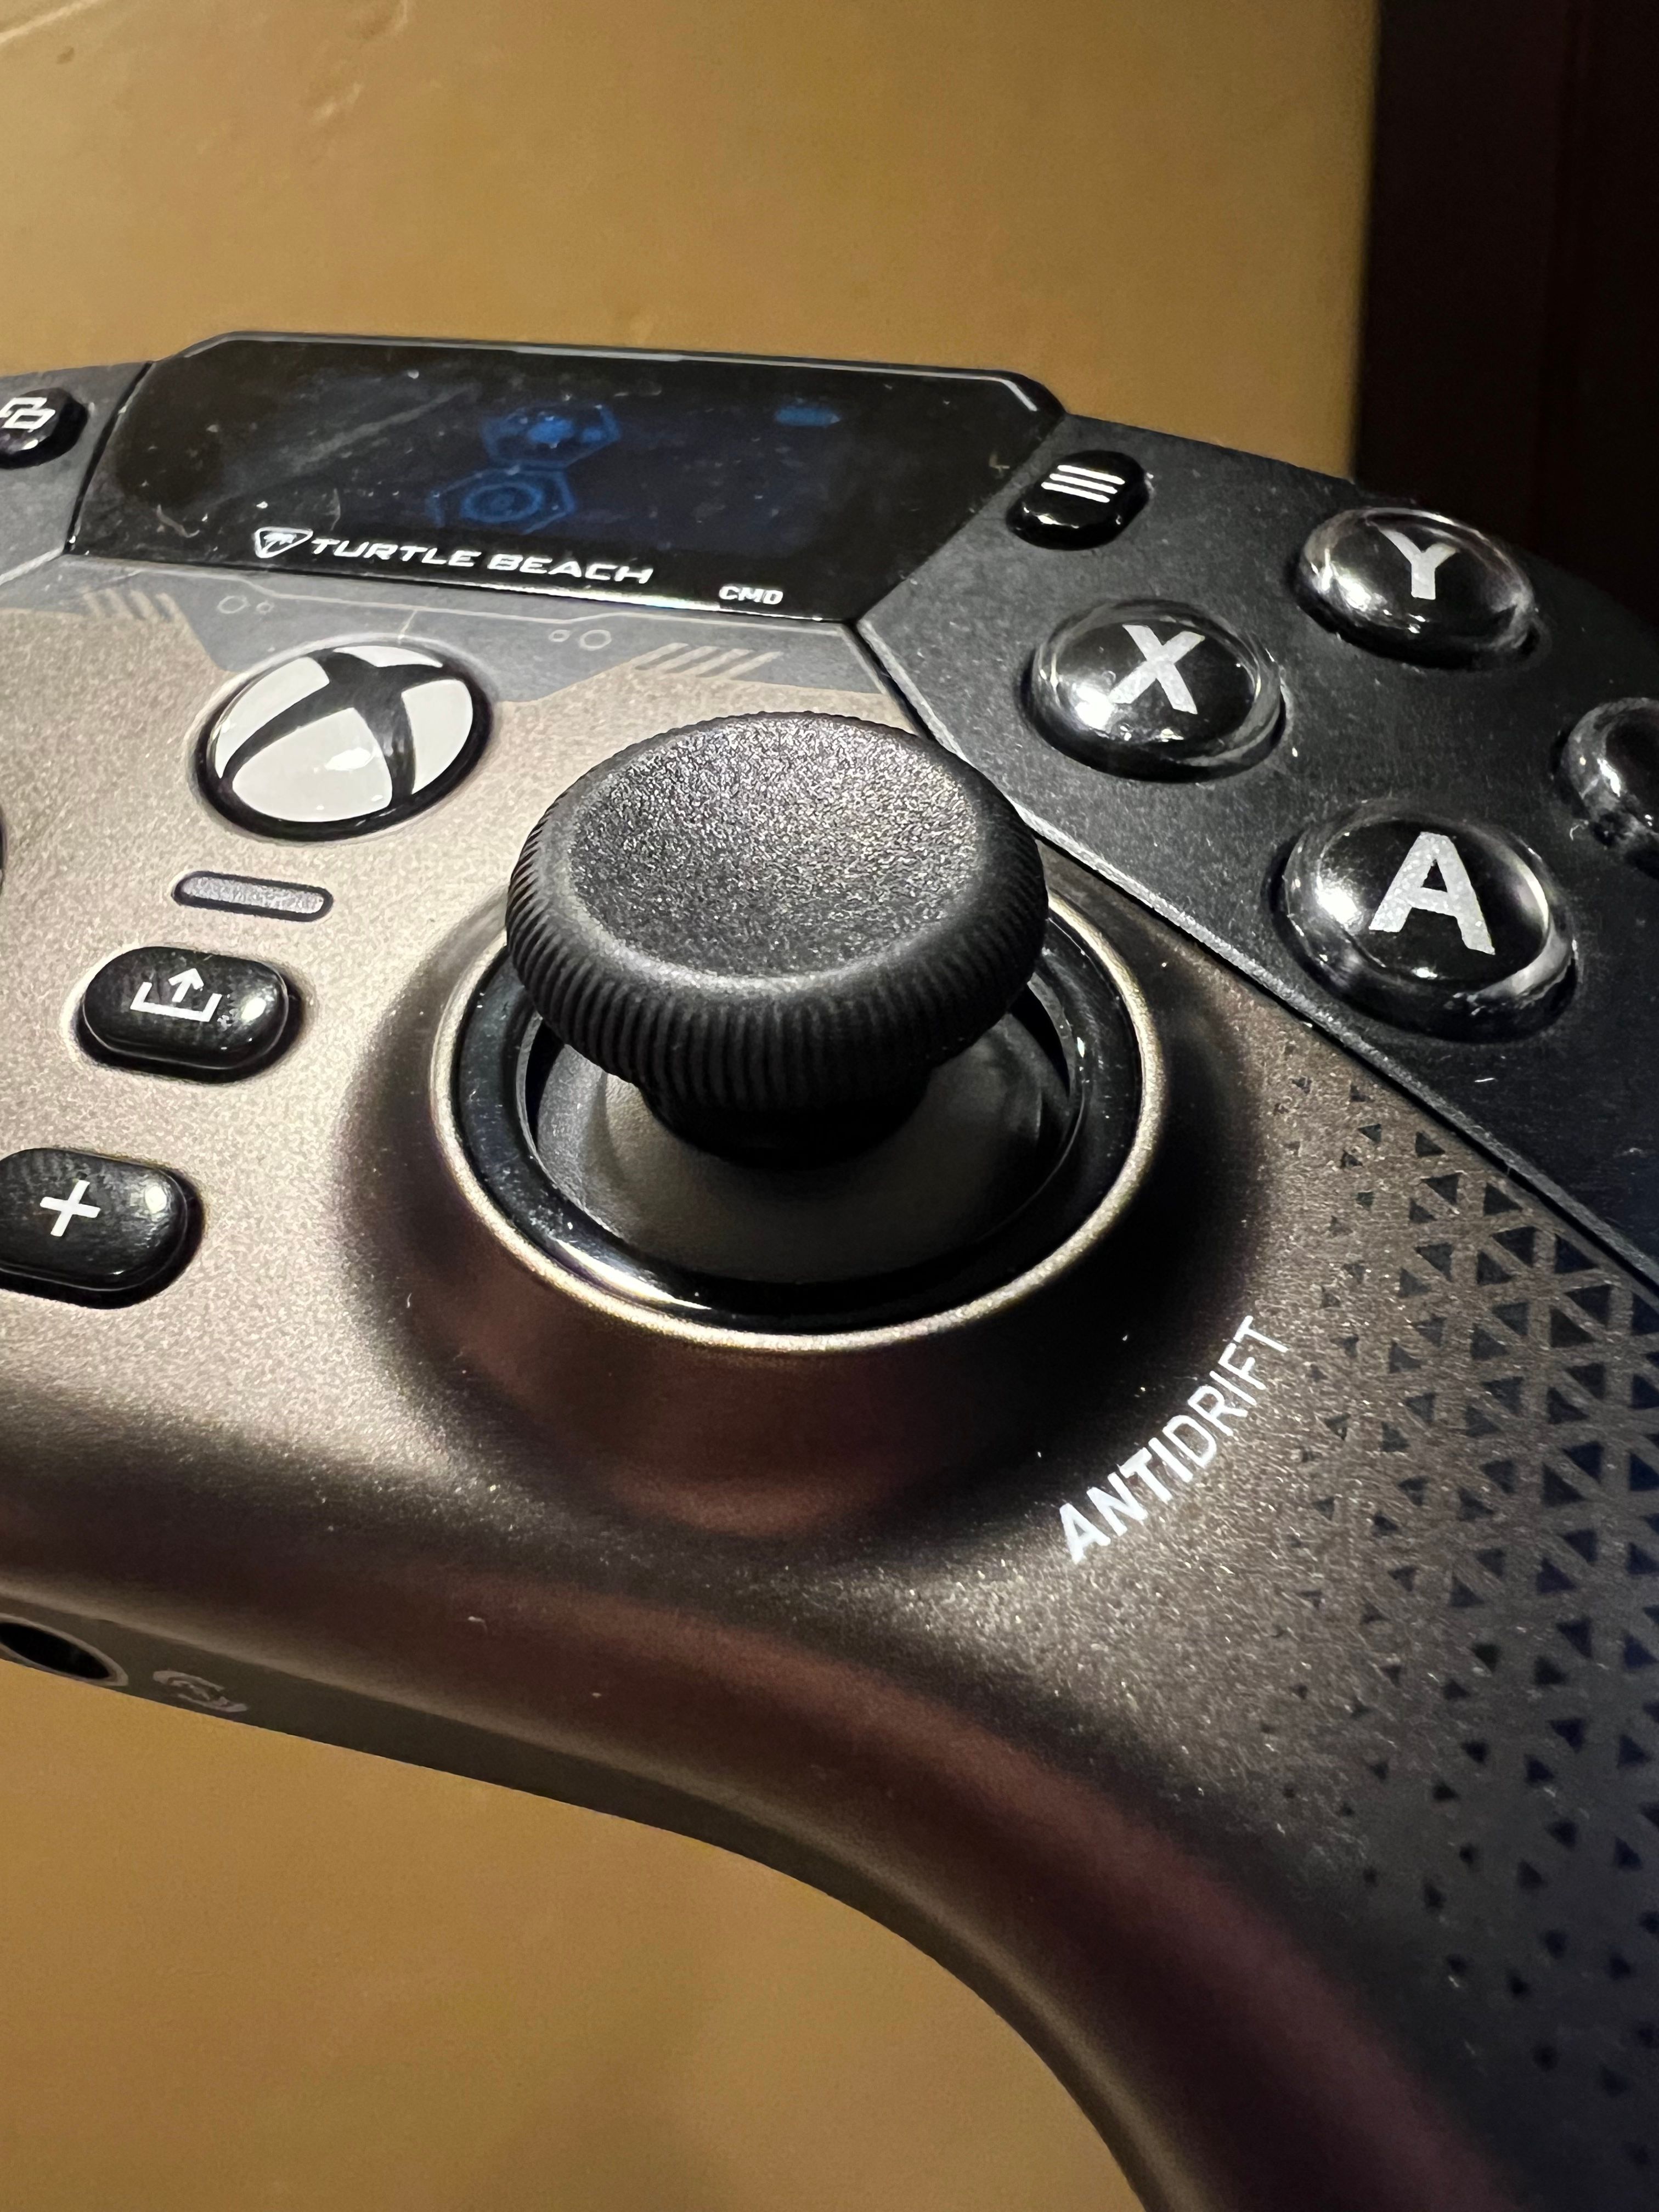 Turtle Beach Stealth Ultra Controller Feature Overview 